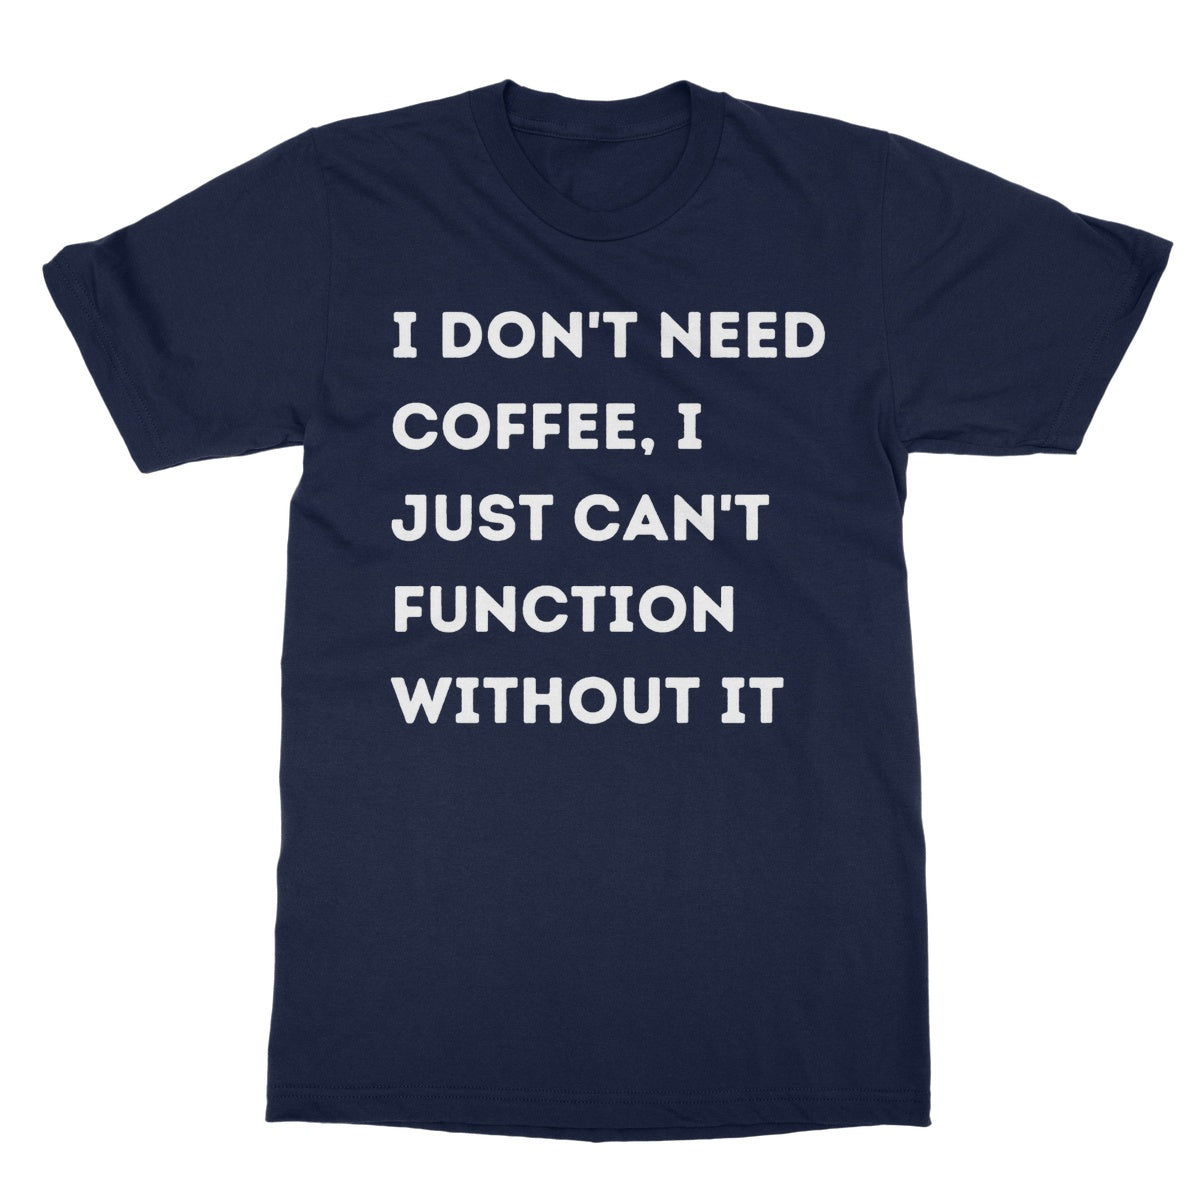 I can't function without coffee t shirt navy